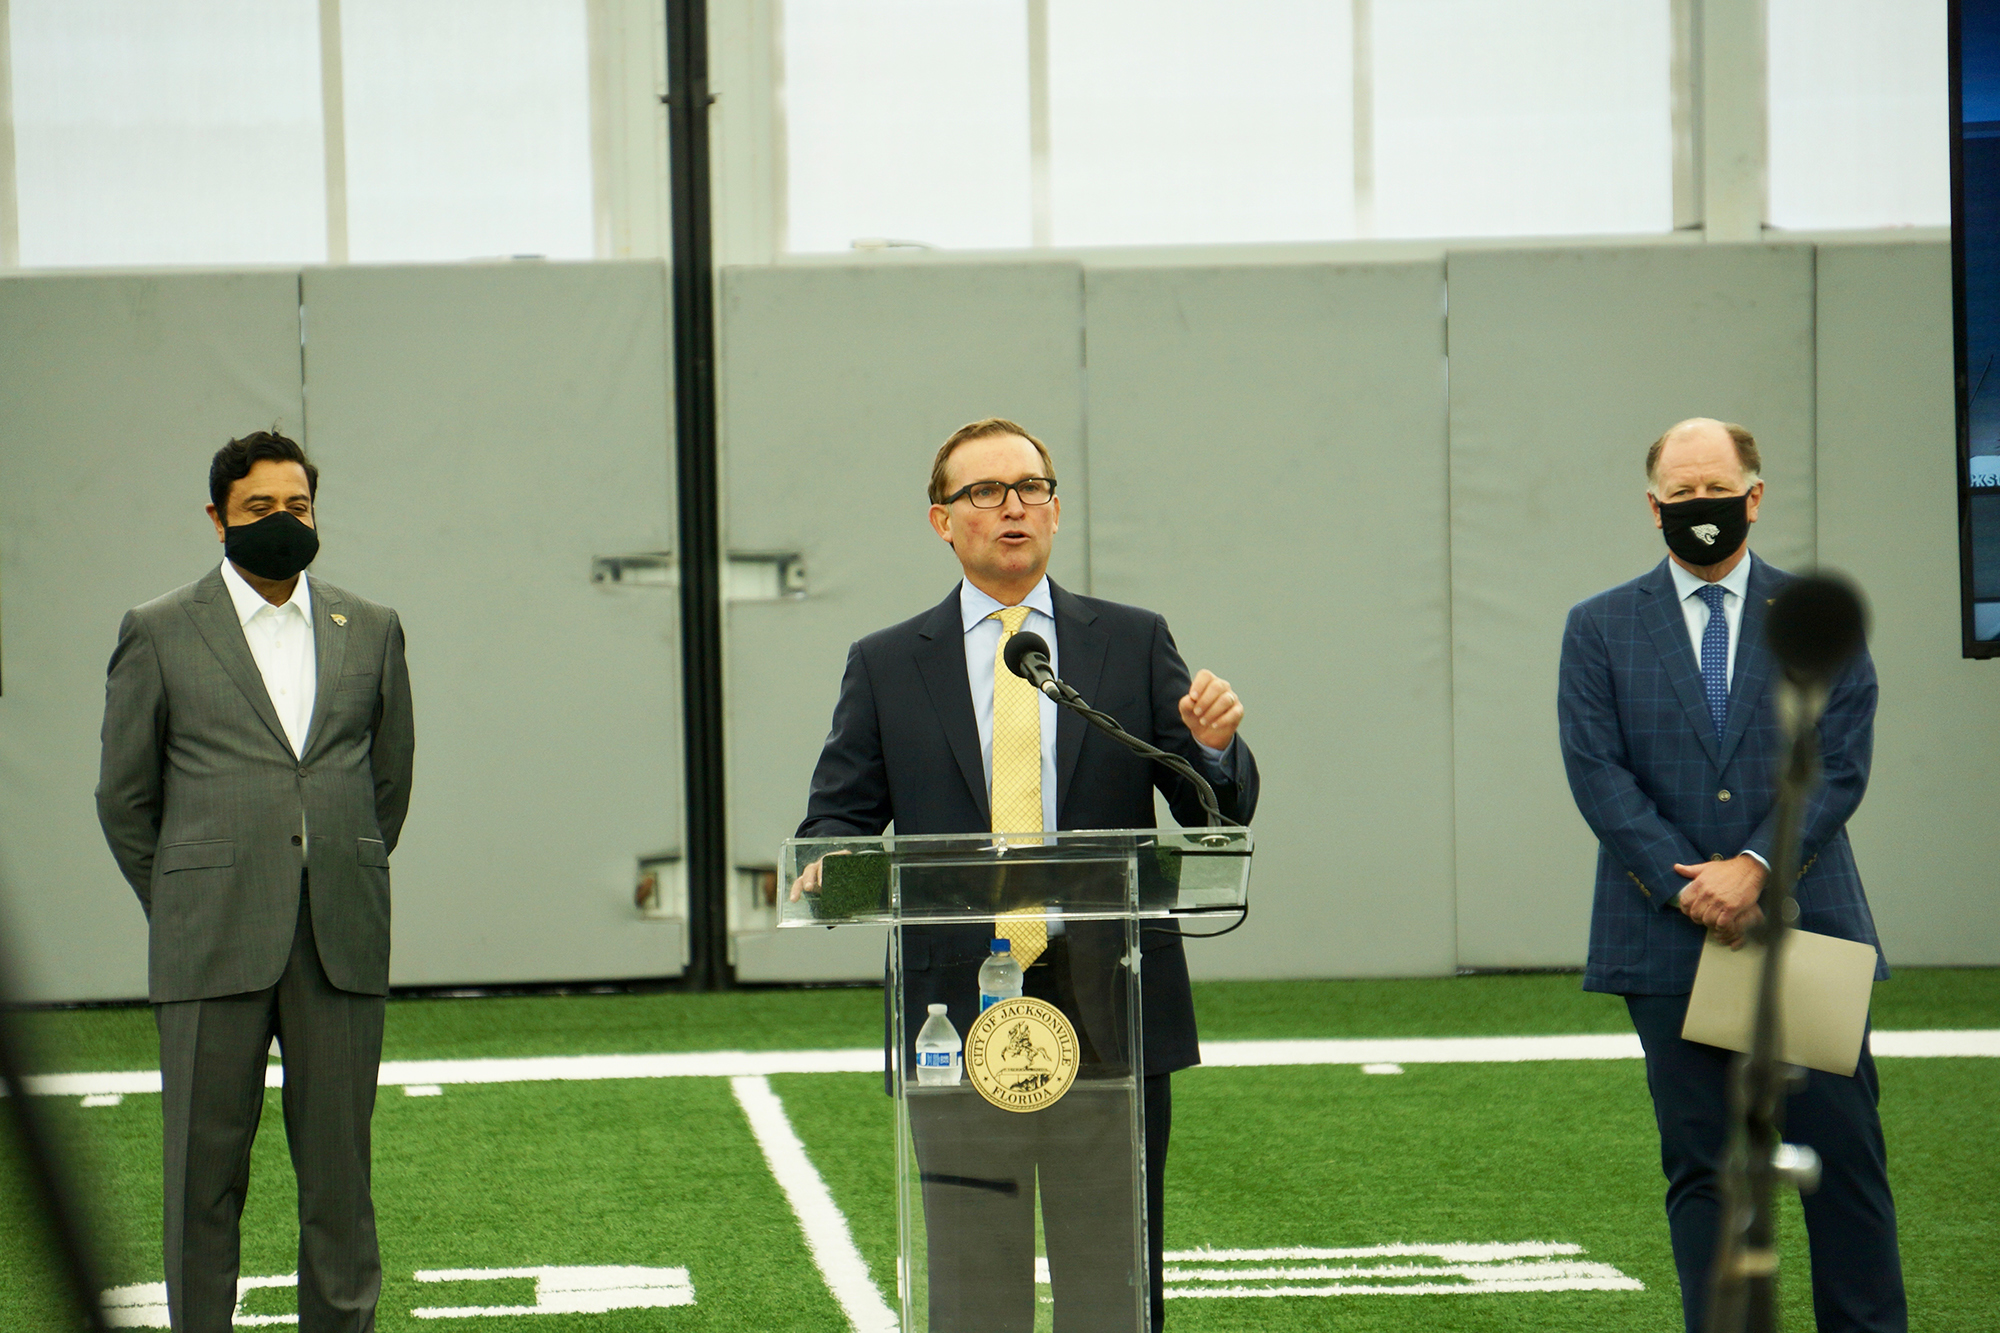 Jacksonville Jaguars owner Shad Khan, Jacksonville Mayor Lenny Curry and Jaguars President Mark Lamping announce the Lot J project. (Photo by Katie Garwood)